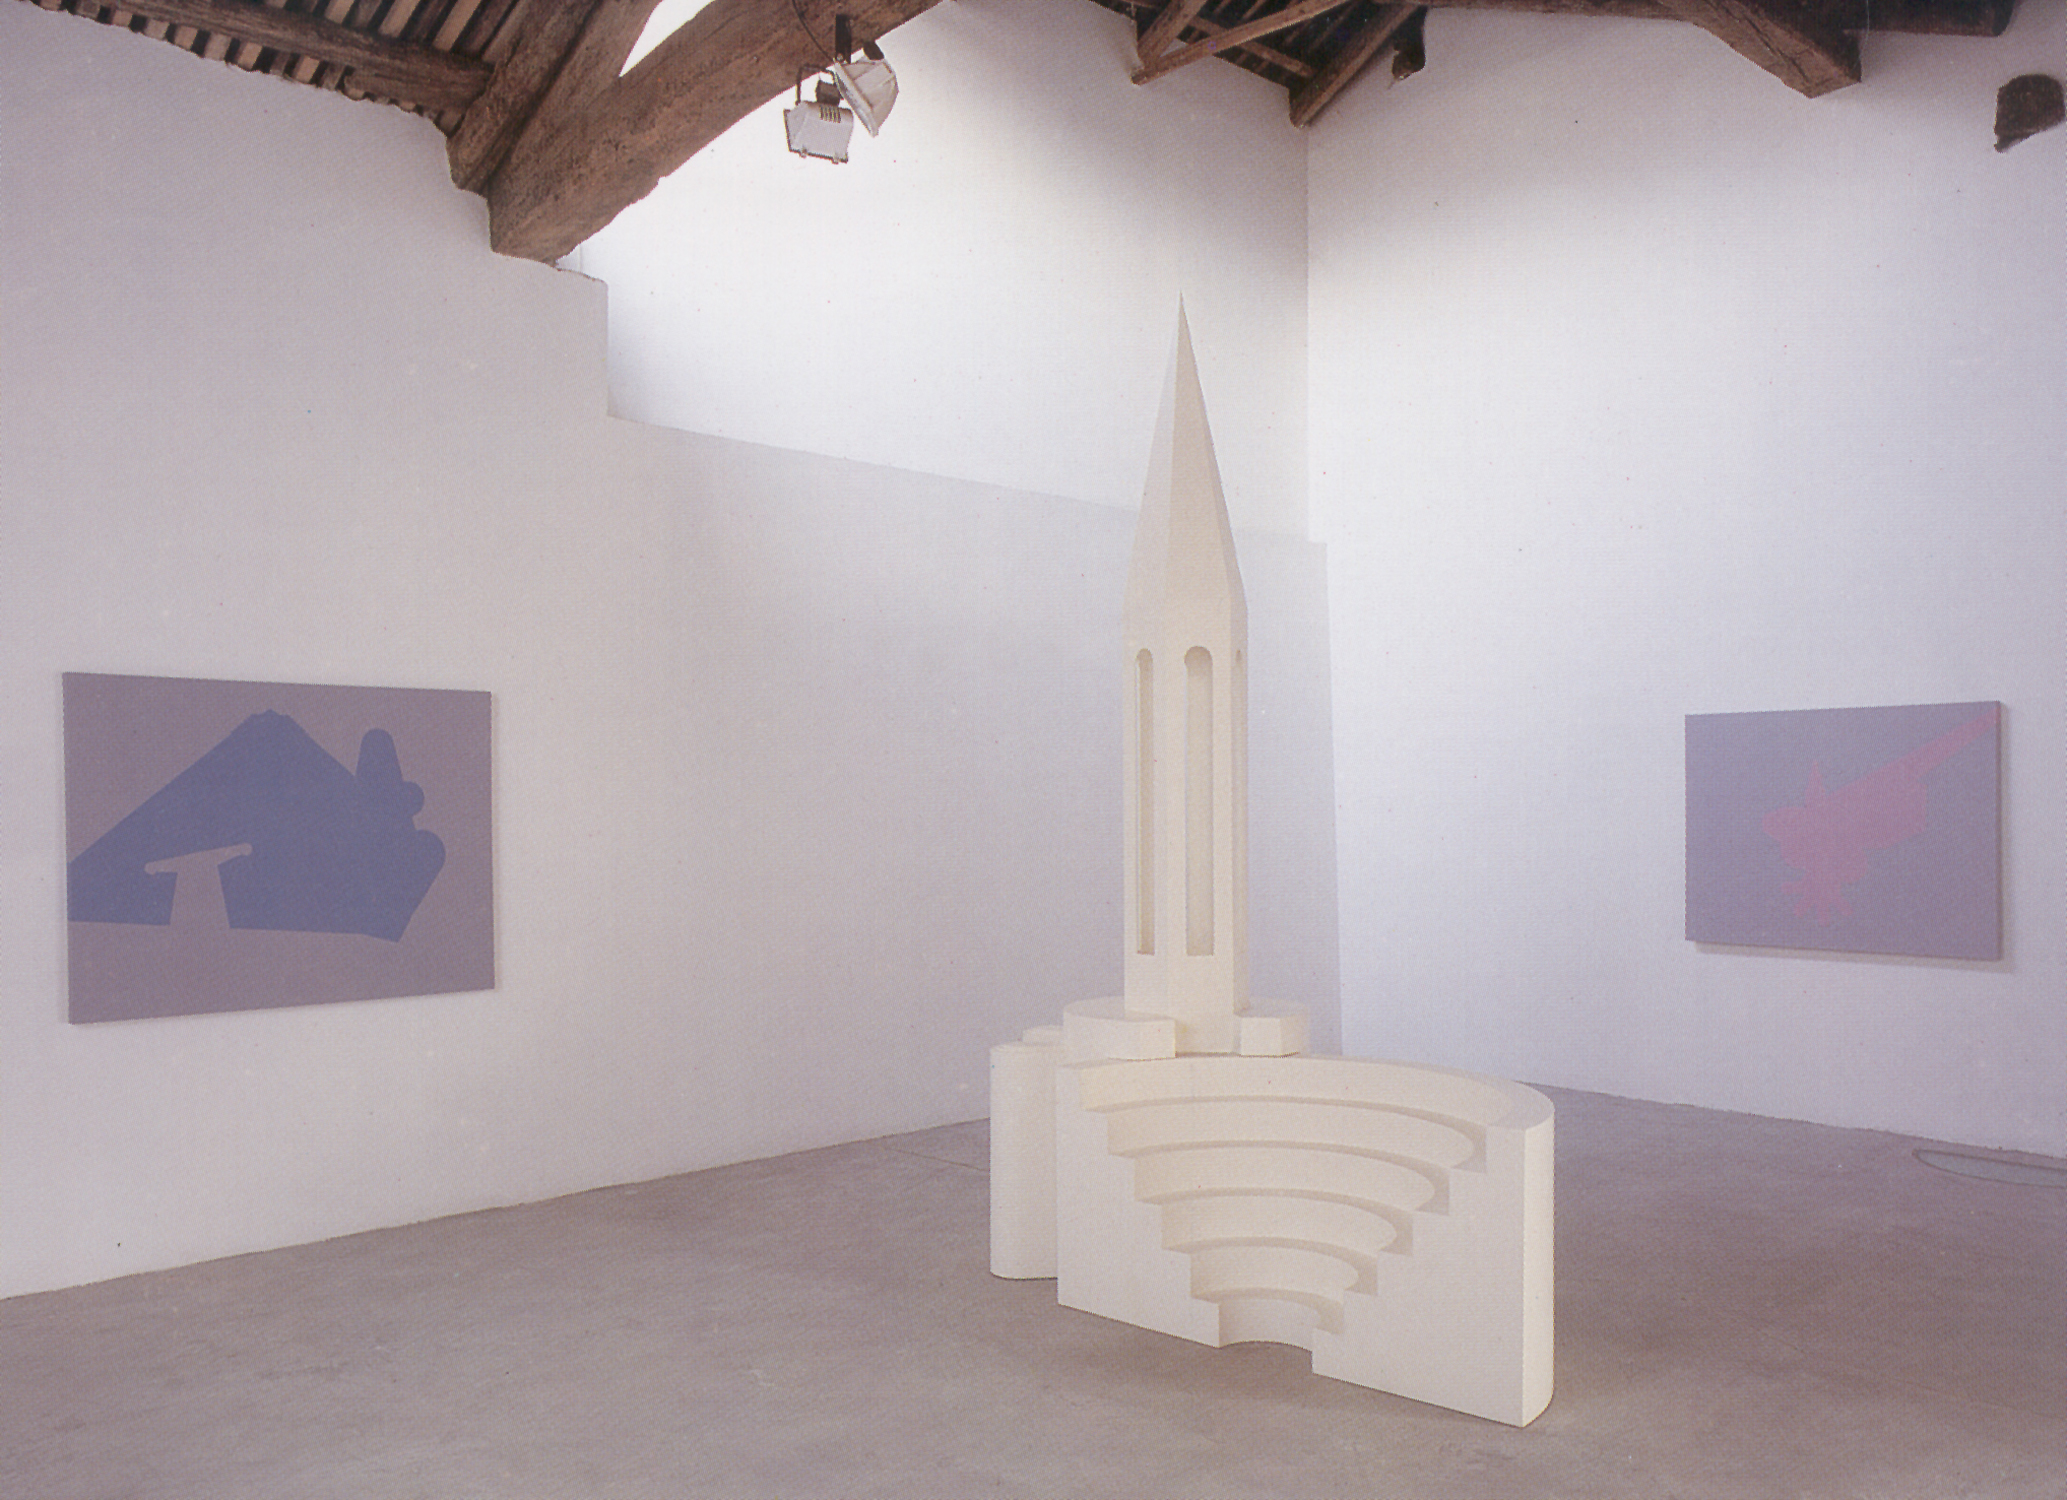   Reconfigured Monuments, 2001, sculpture:
painted wood, 210 x 150 x 270 cm and three paintings: acrylic on canvas,140 x
110 cm. Installation view, Marco Noire Contemporary Arts Gallery, Turin, Italy,
2002. Courtesy: The Modern Art Gallery (GAM), Tur